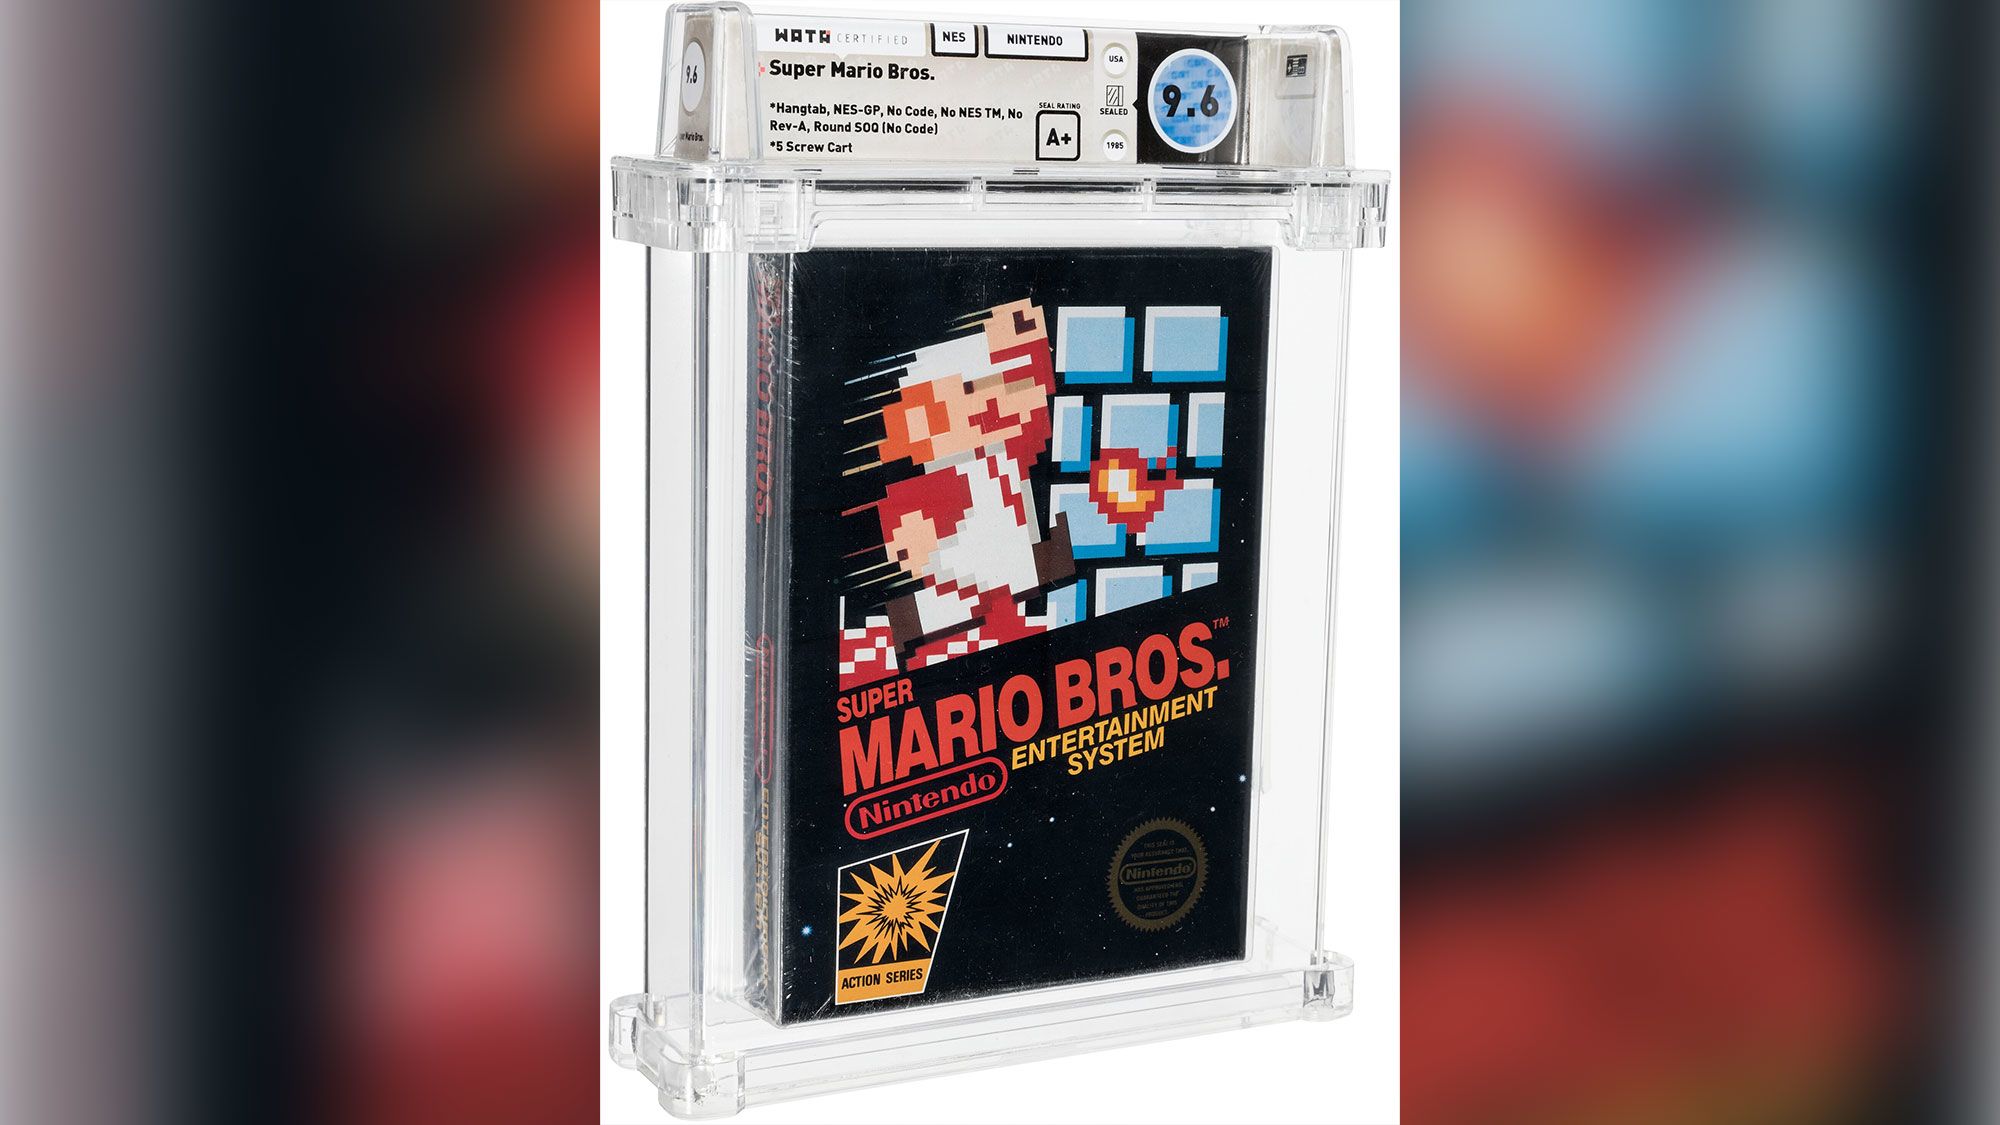 Most expensive video game ever: Rare copy of 'Super Mario 3' sold at auction